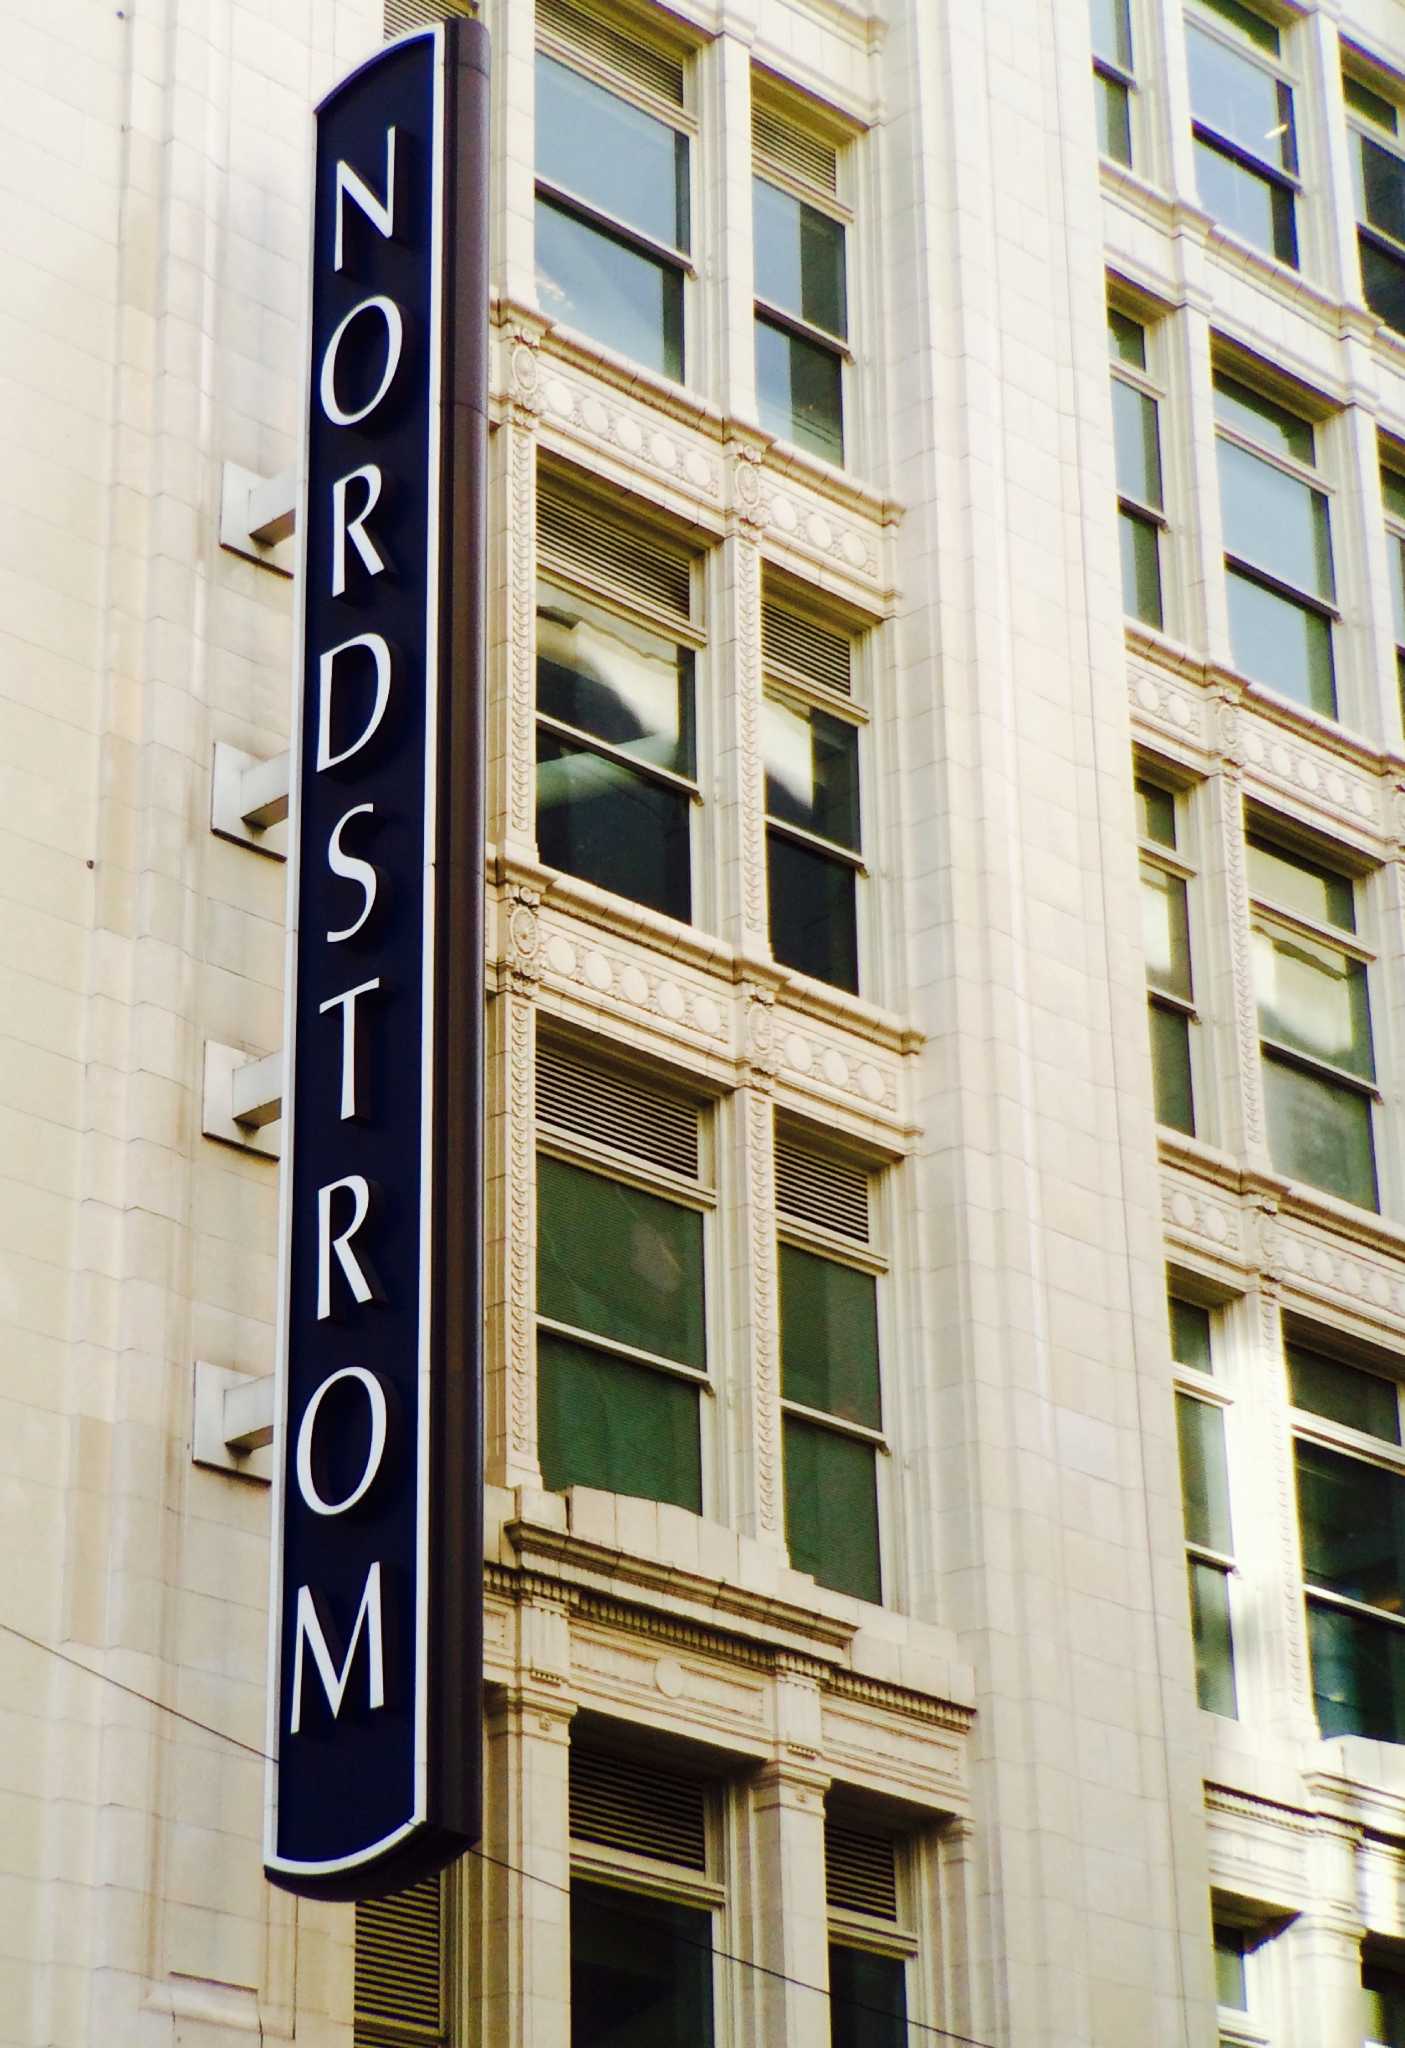 Nordstrom family looks at going private